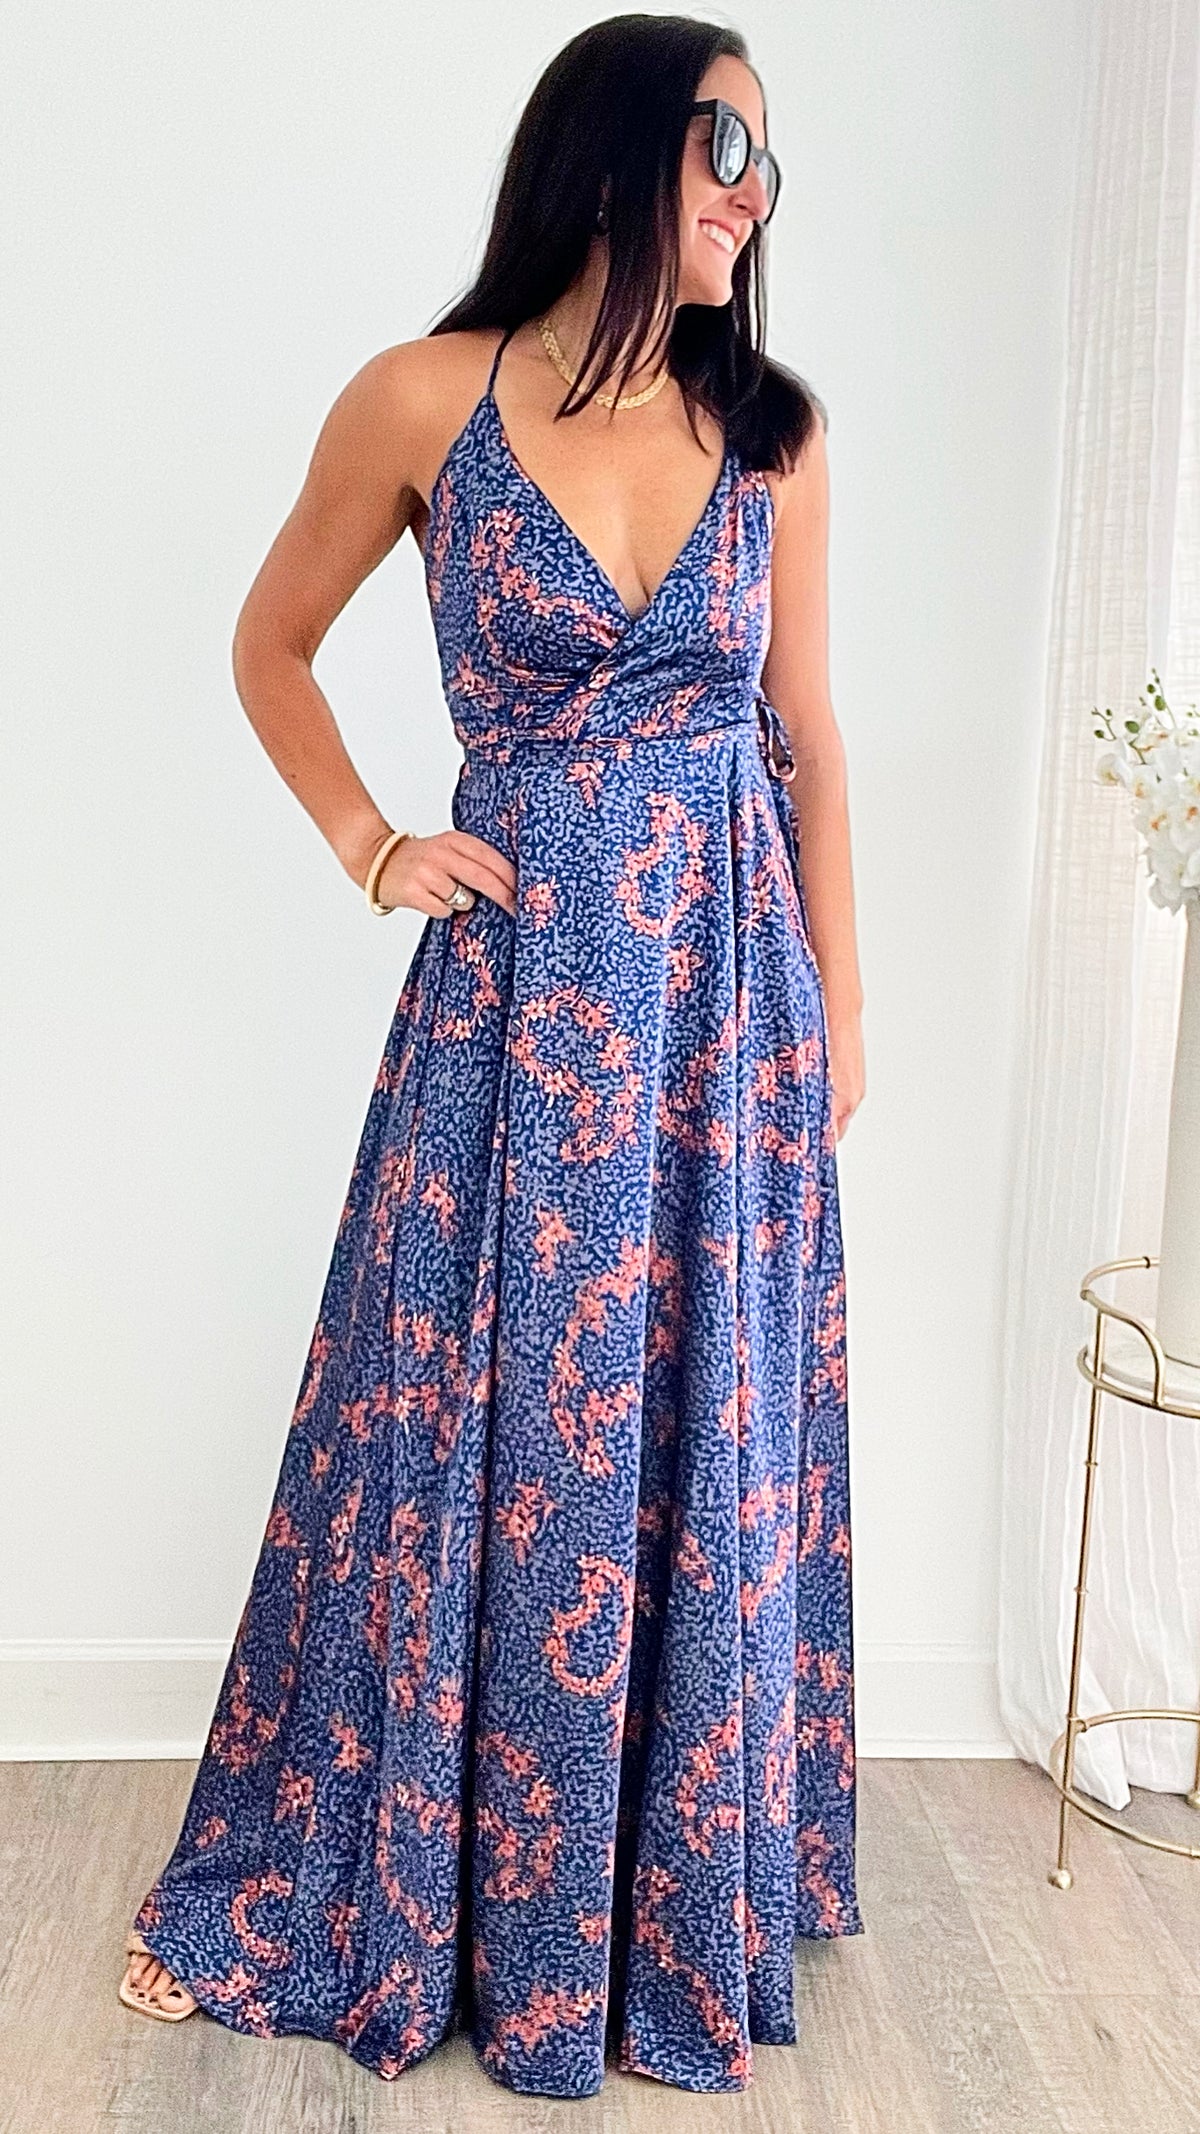 Purple Sleeveless Wrap Maxi Dress-200 dresses/jumpsuits/rompers-HYFVE-Coastal Bloom Boutique, find the trendiest versions of the popular styles and looks Located in Indialantic, FL